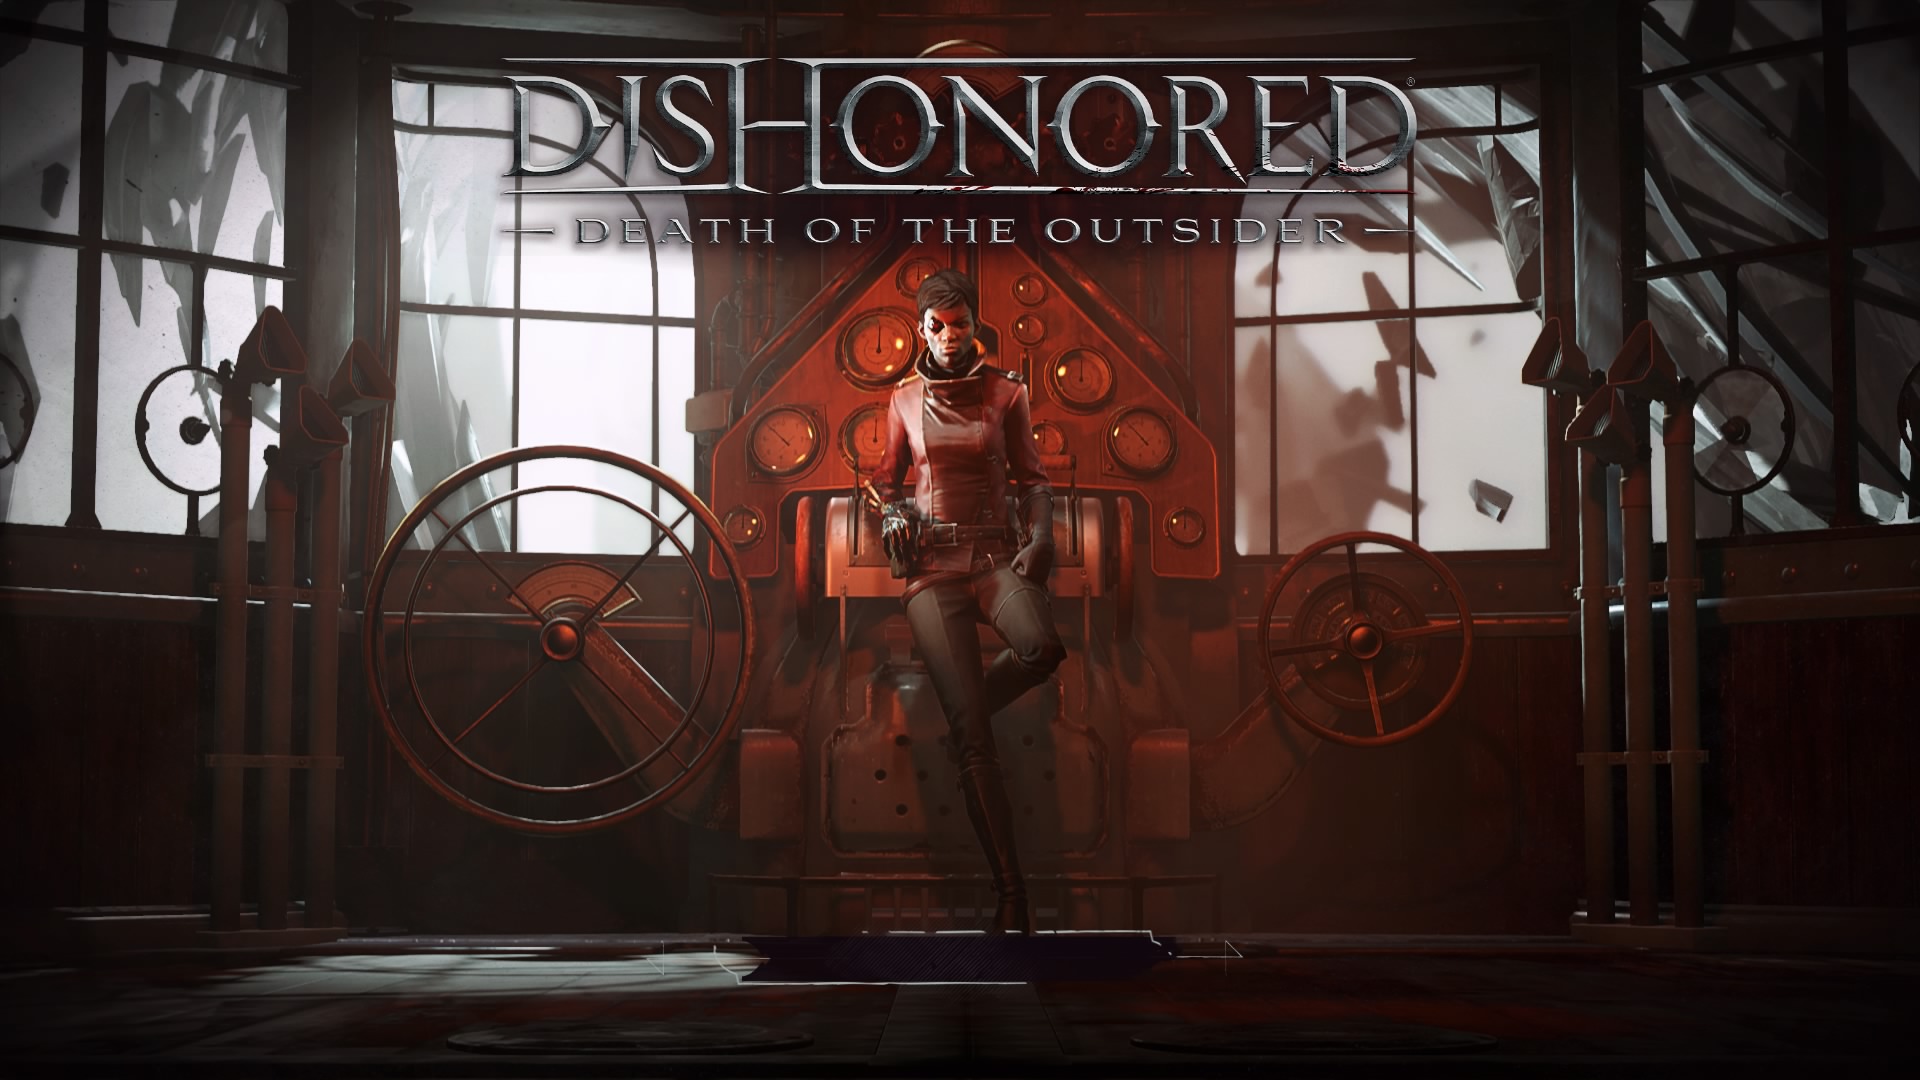 dishonored 2 death of the outsider trainer